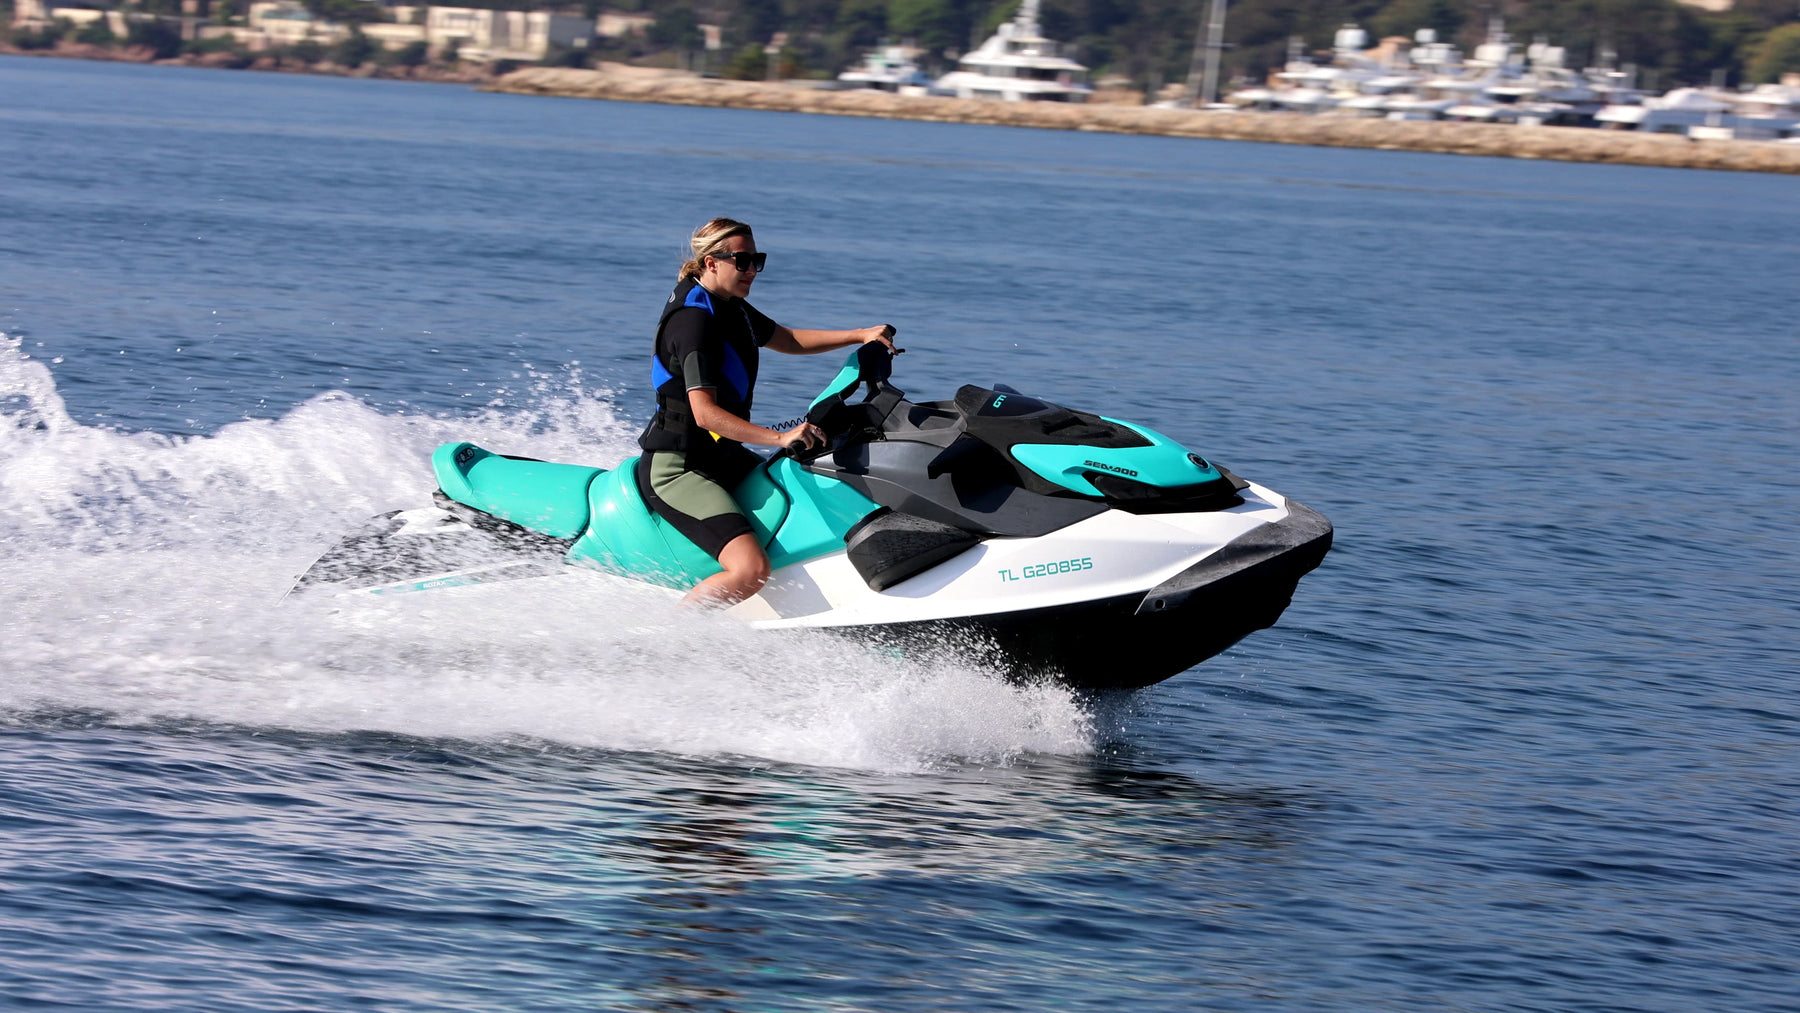 Seascope France Jet Ski PWC Personal Watercraft Instructor Training Course in Antibes France